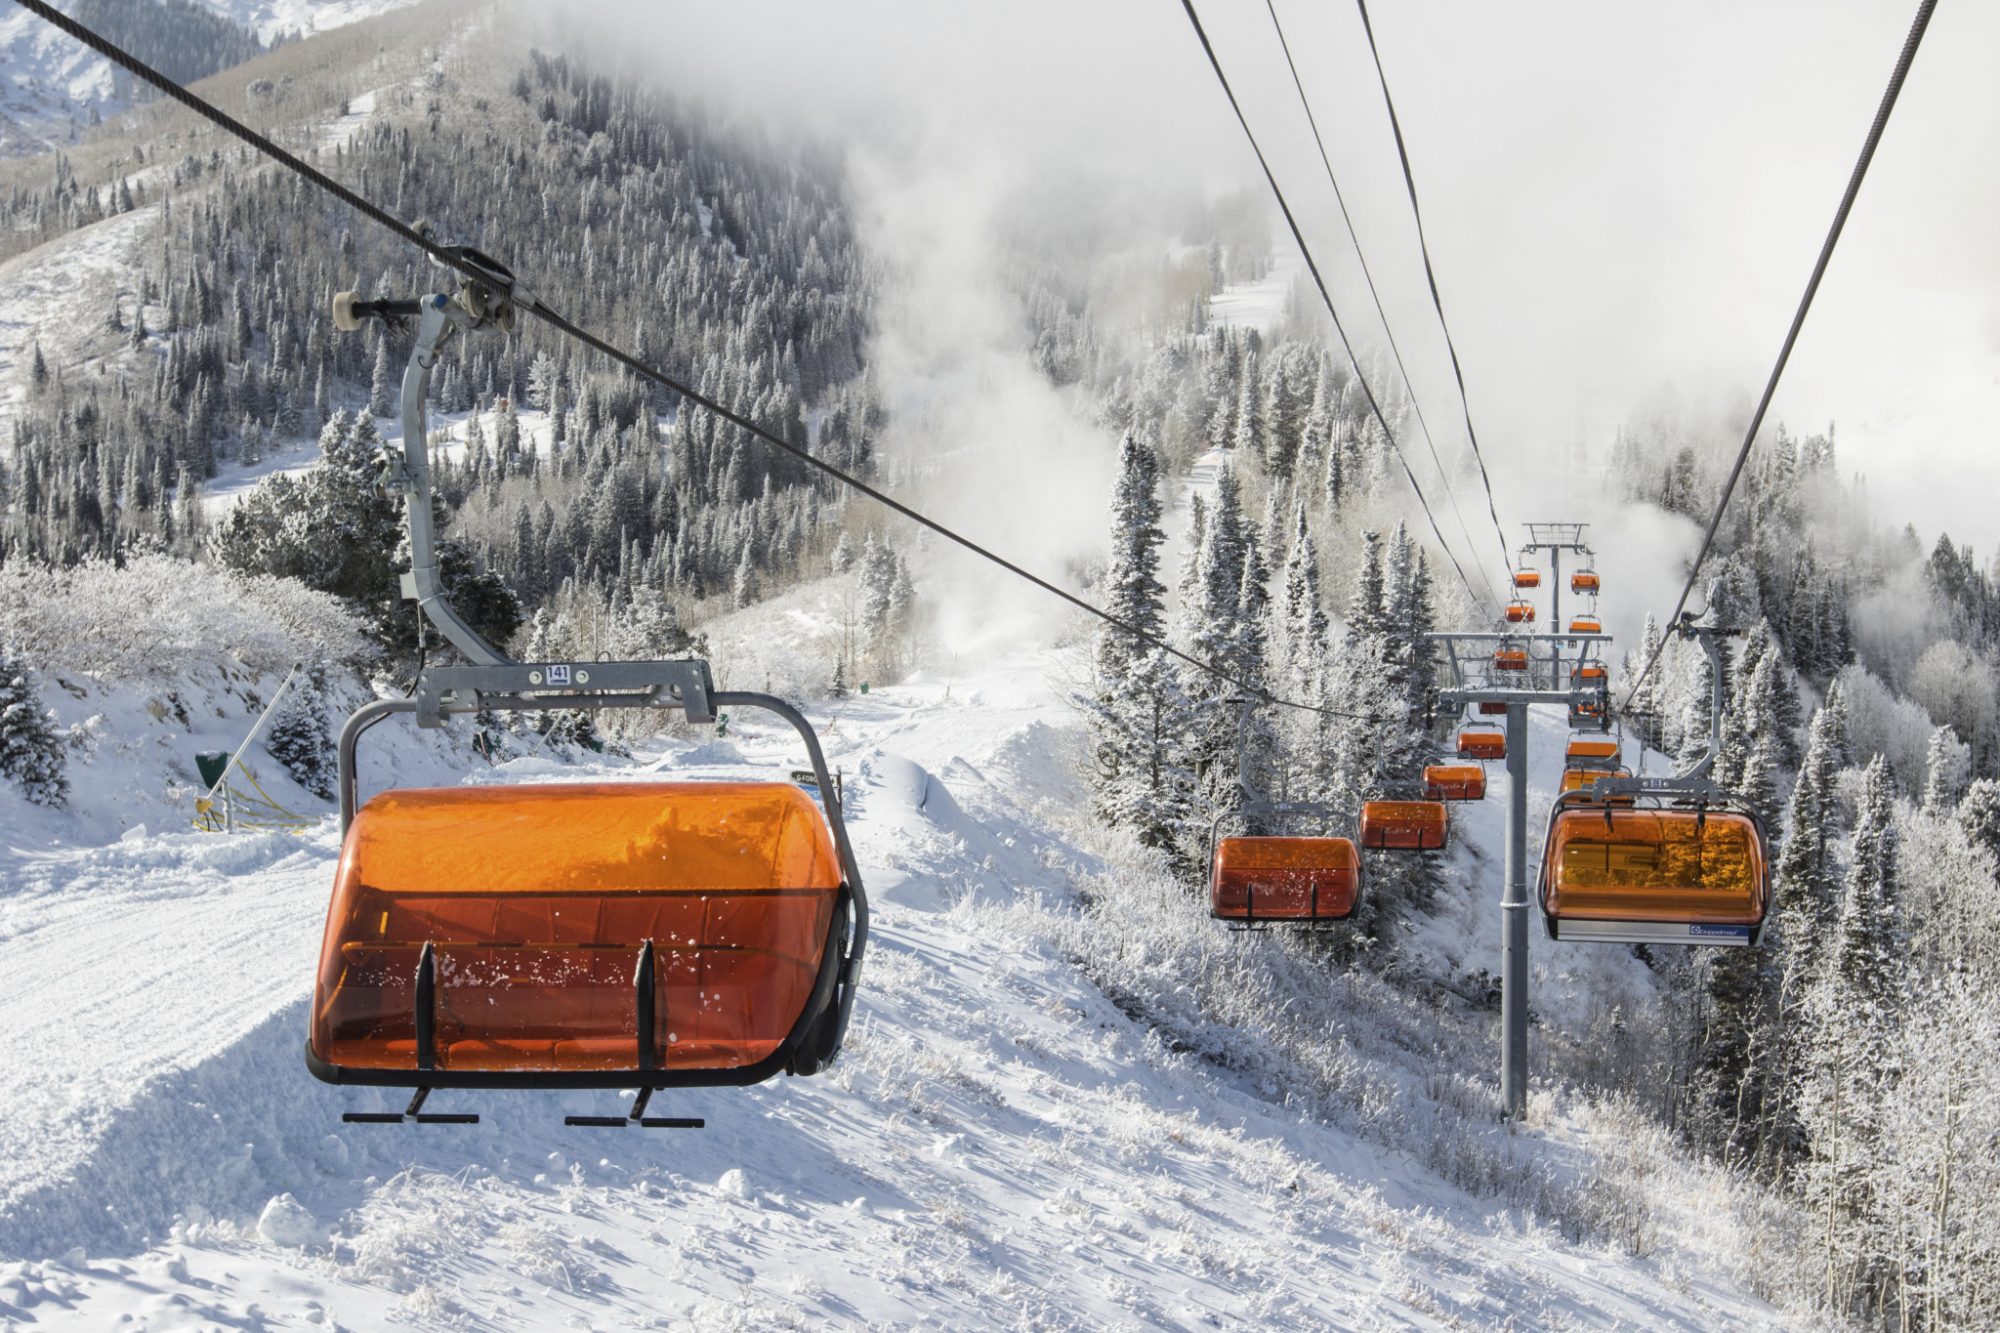 Park City orange bubble. photo: Vail Resorts. Park City skiing - photo: Scott Markewitz. Vail Resorts. Park City Town. Vail Resorts Announces Pending Sale of Park City Mountain Base Area Site for Mixed-Use Project Development.